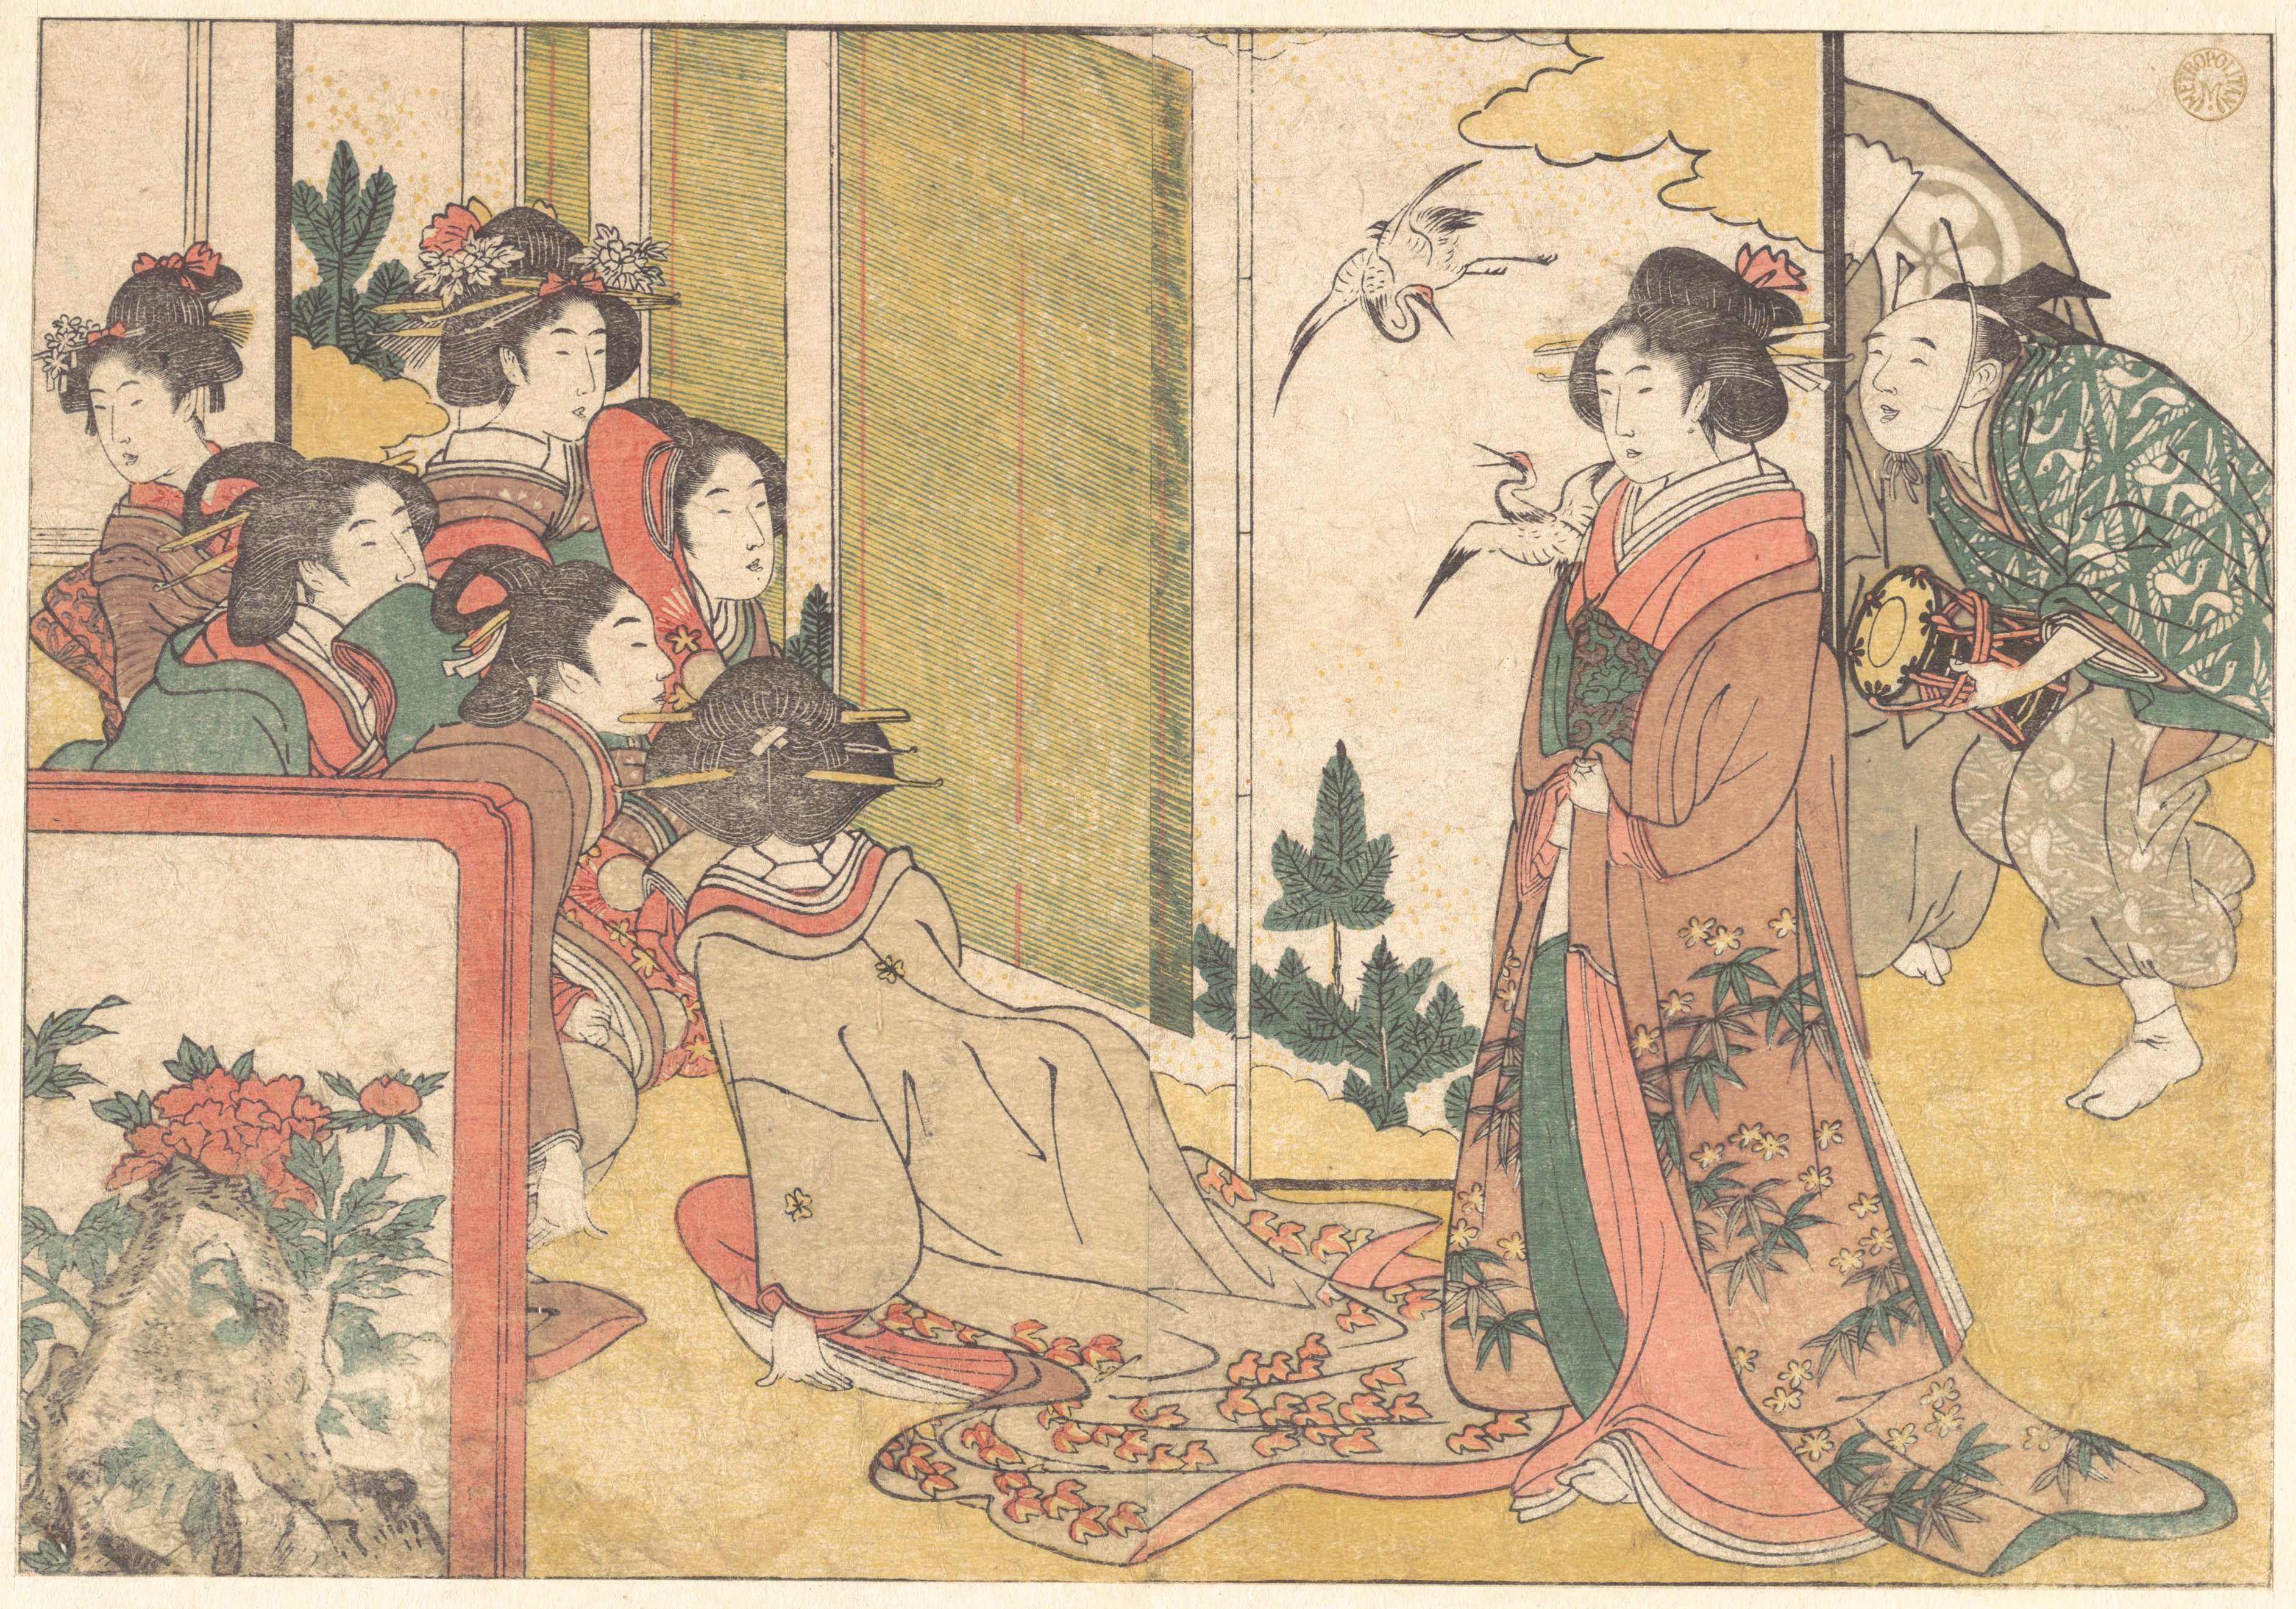 Girls Entertained by Performers, from the illustrated book Flowers of the F...